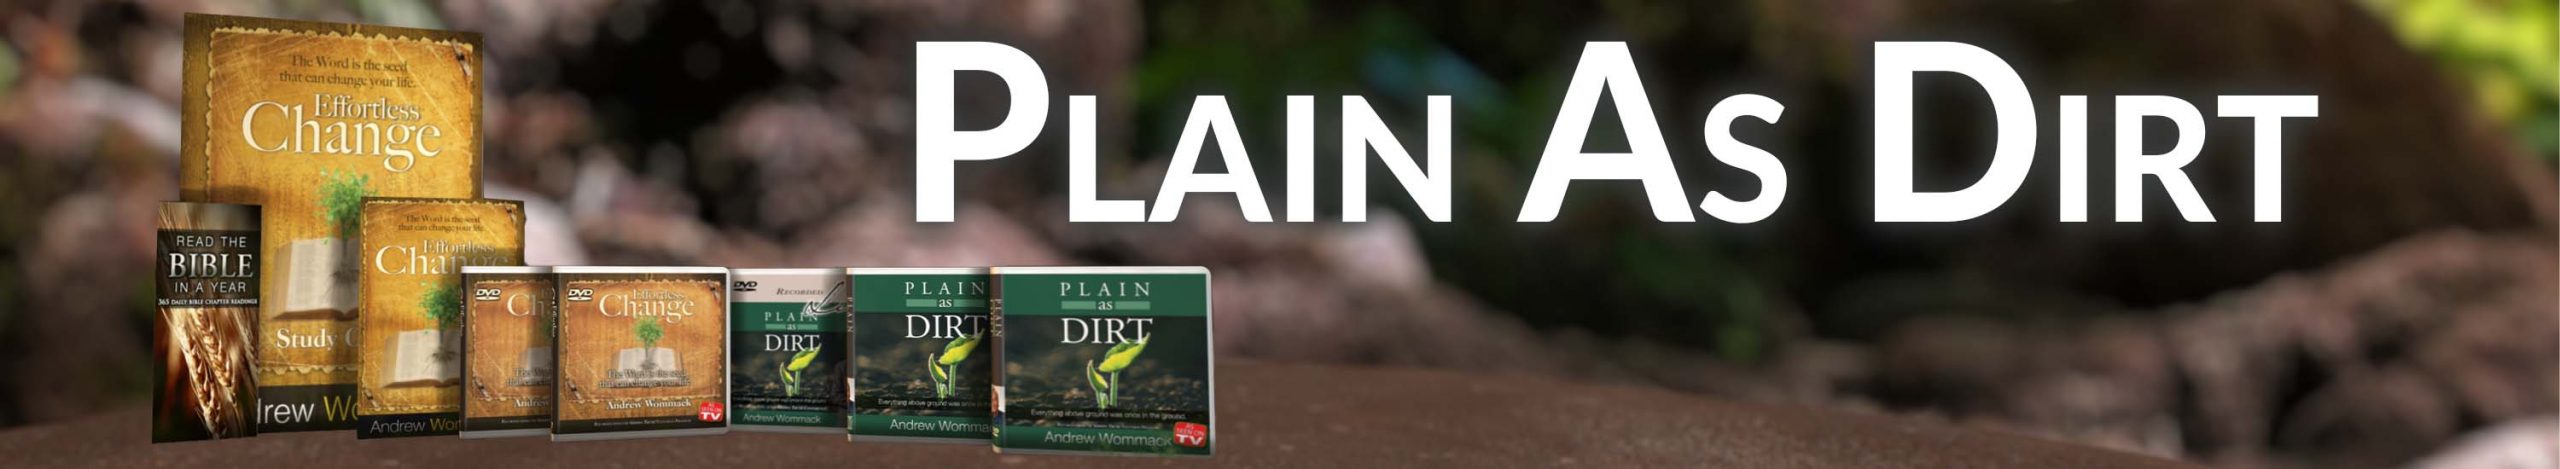 Plain As Dirt products banner